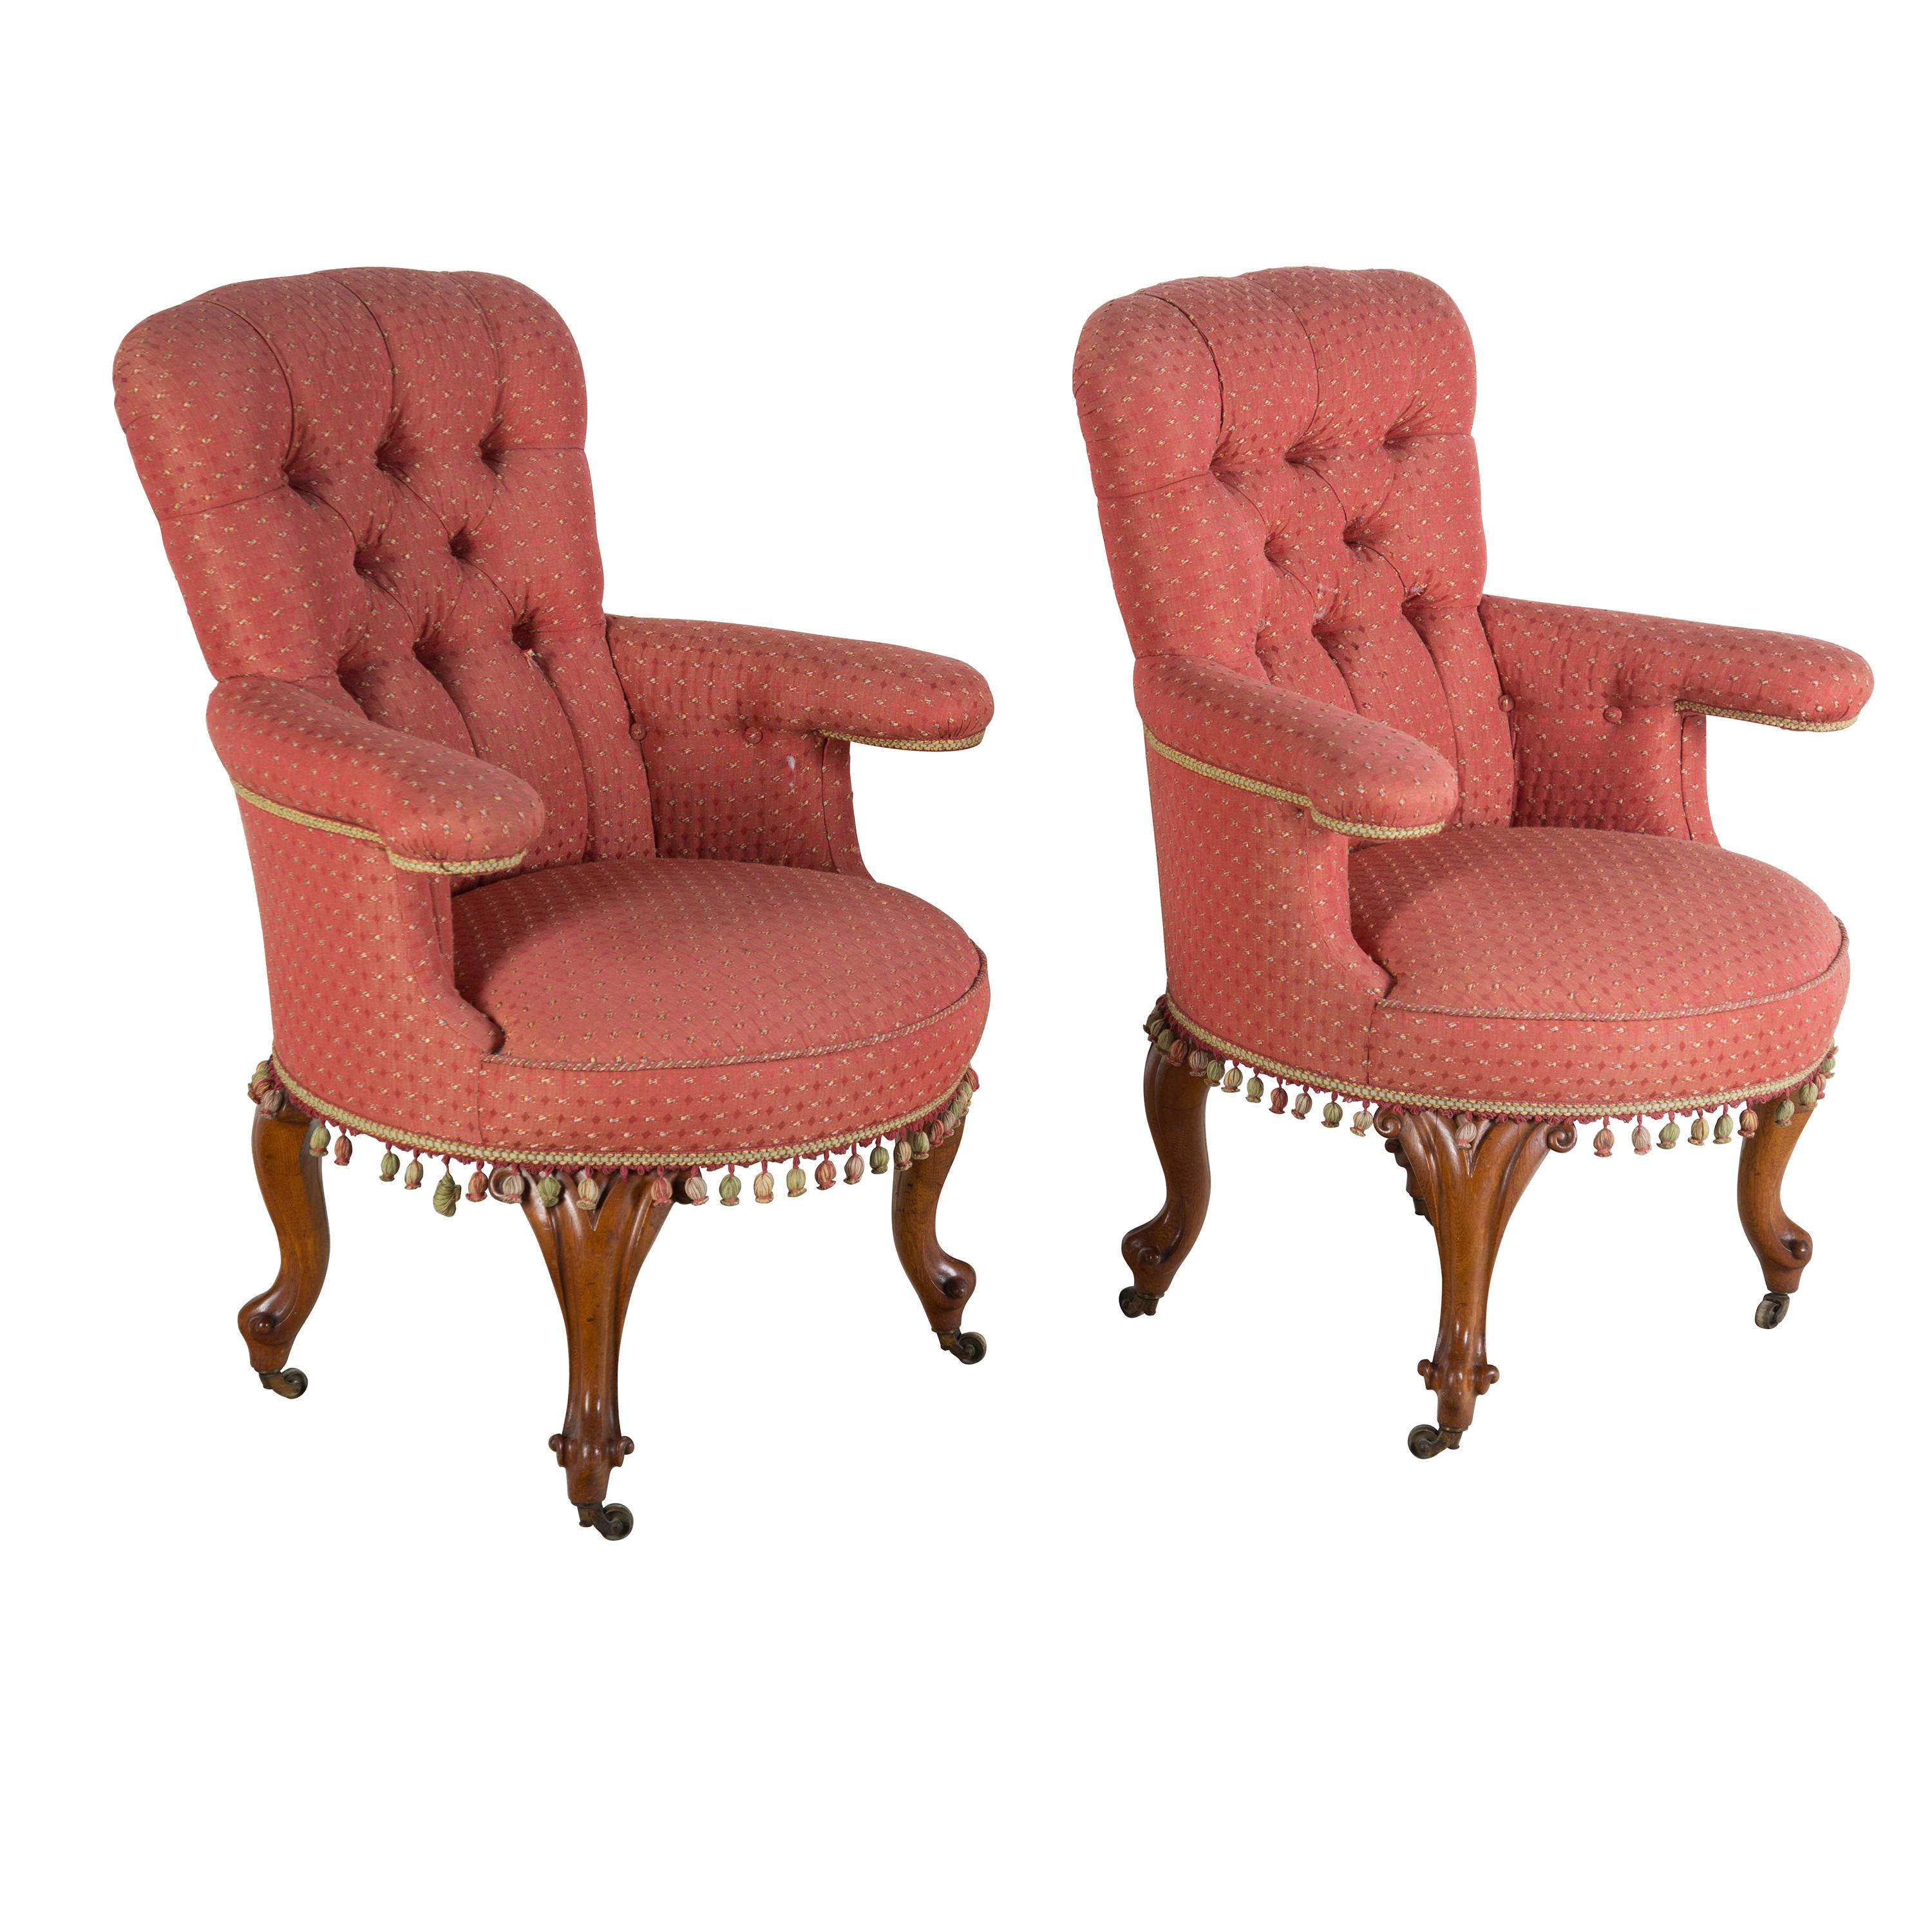 Pair of Gillows type library chairs.